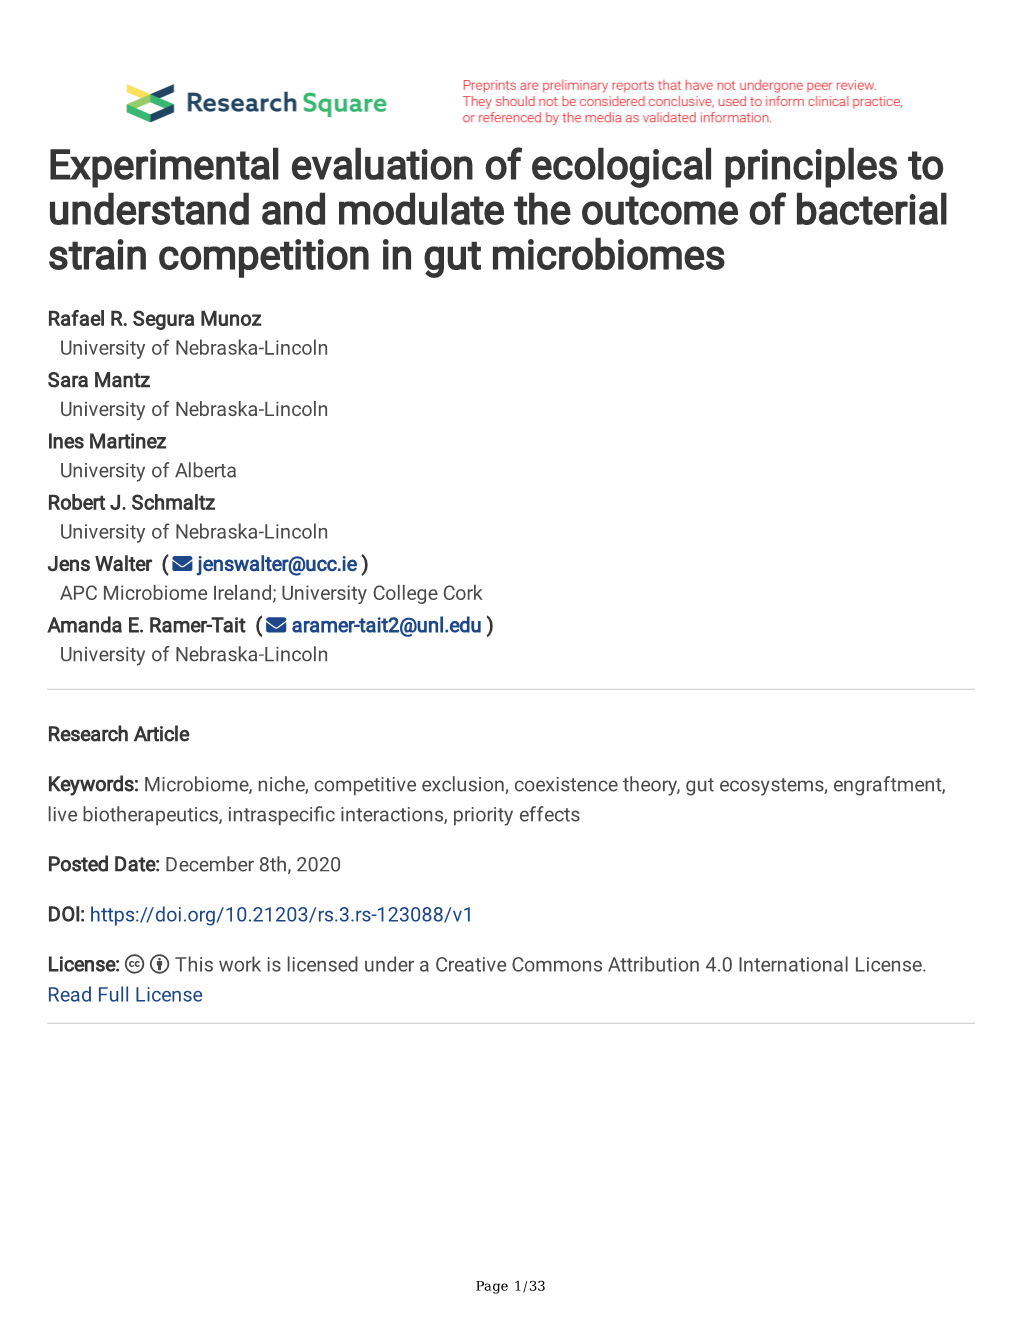 Experimental Evaluation of Ecological Principles to Understand and Modulate the Outcome of Bacterial Strain Competition in Gut Microbiomes